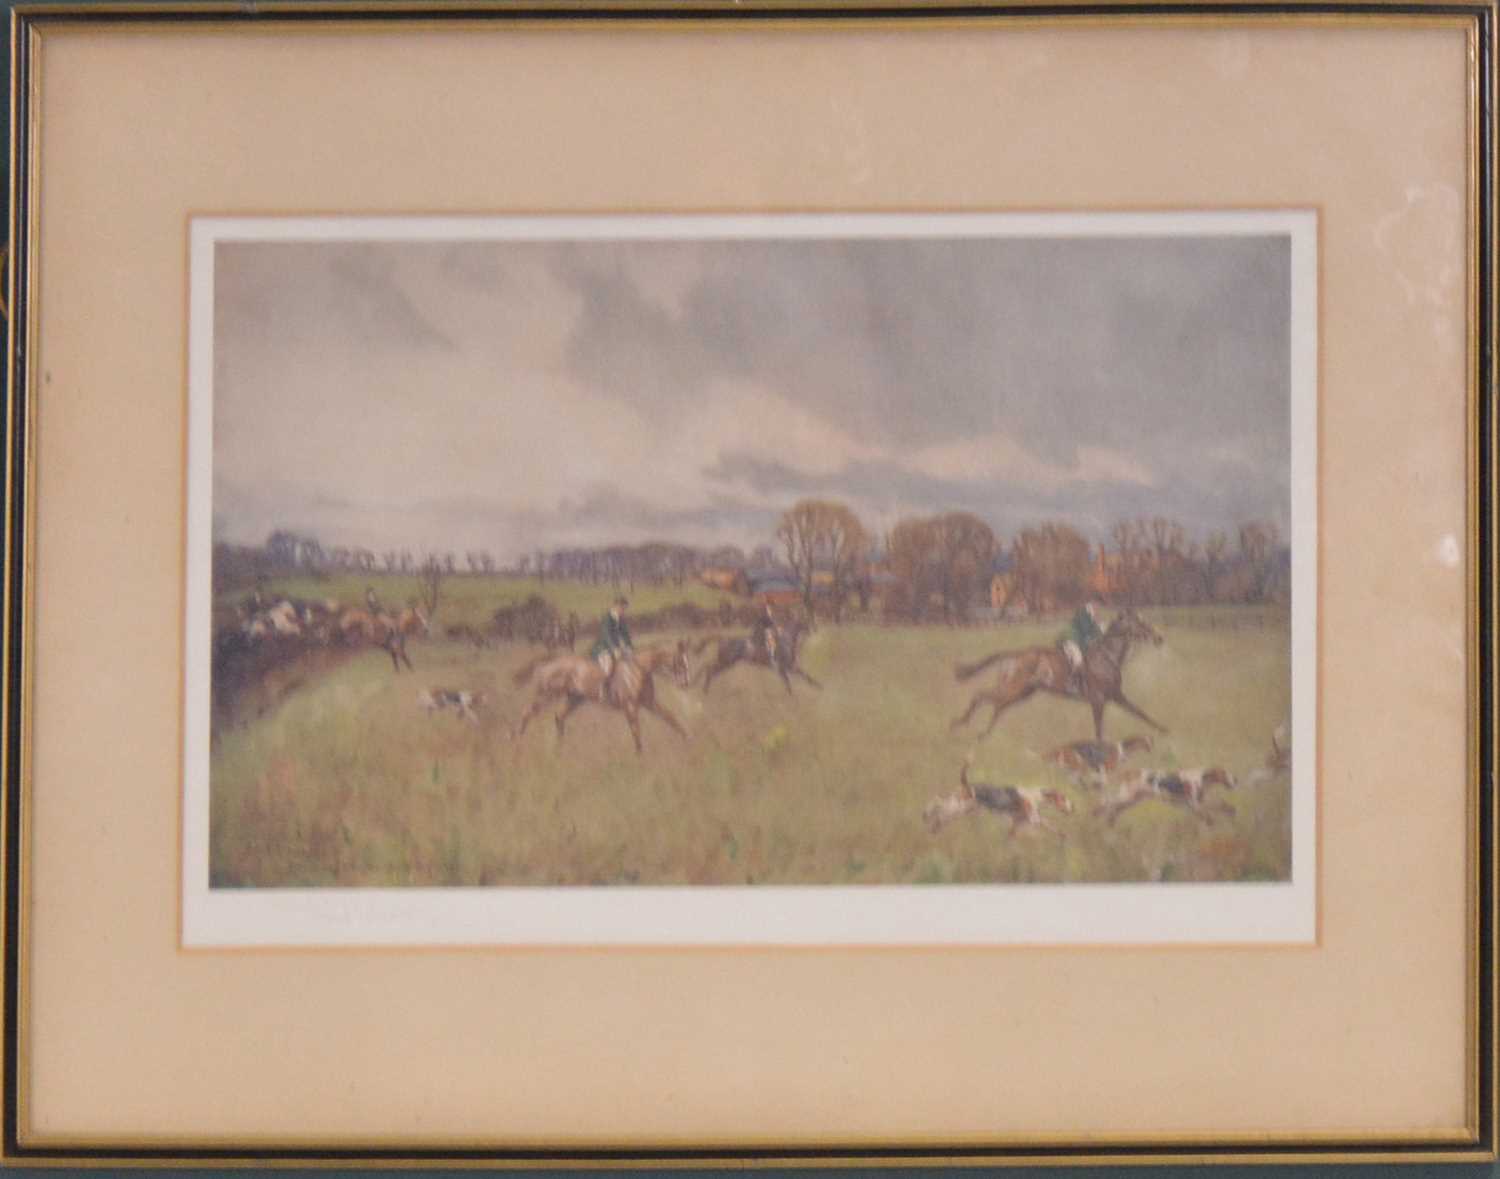 After Lionel Edwards, Hunting Countries - The Cotswold and The Waddon Chase, and other prints. - Image 12 of 14